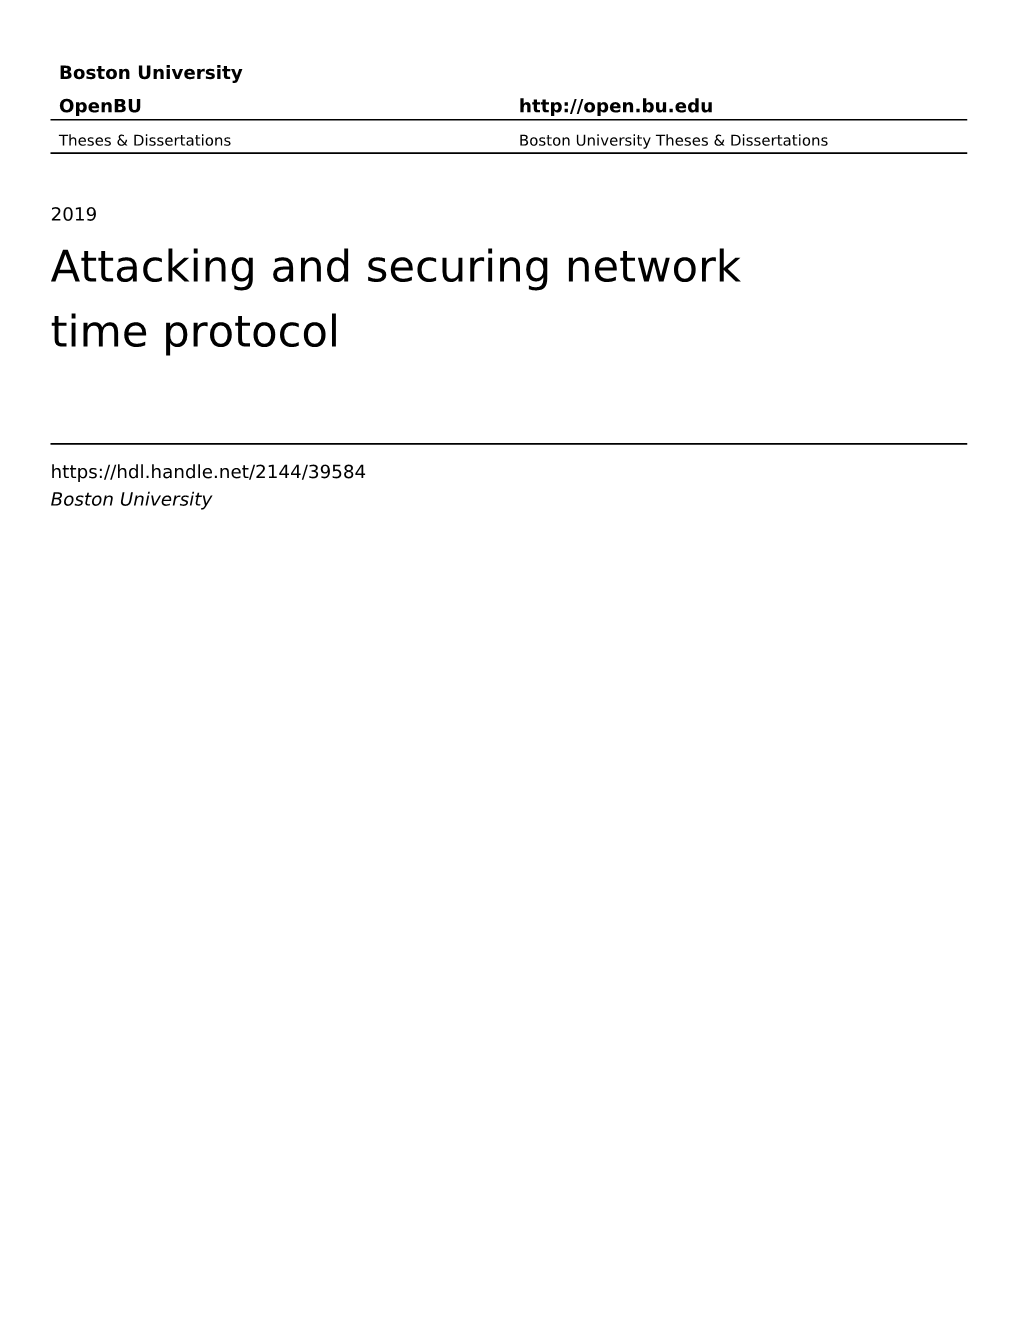 Attacking and Securing Network Time Protocol